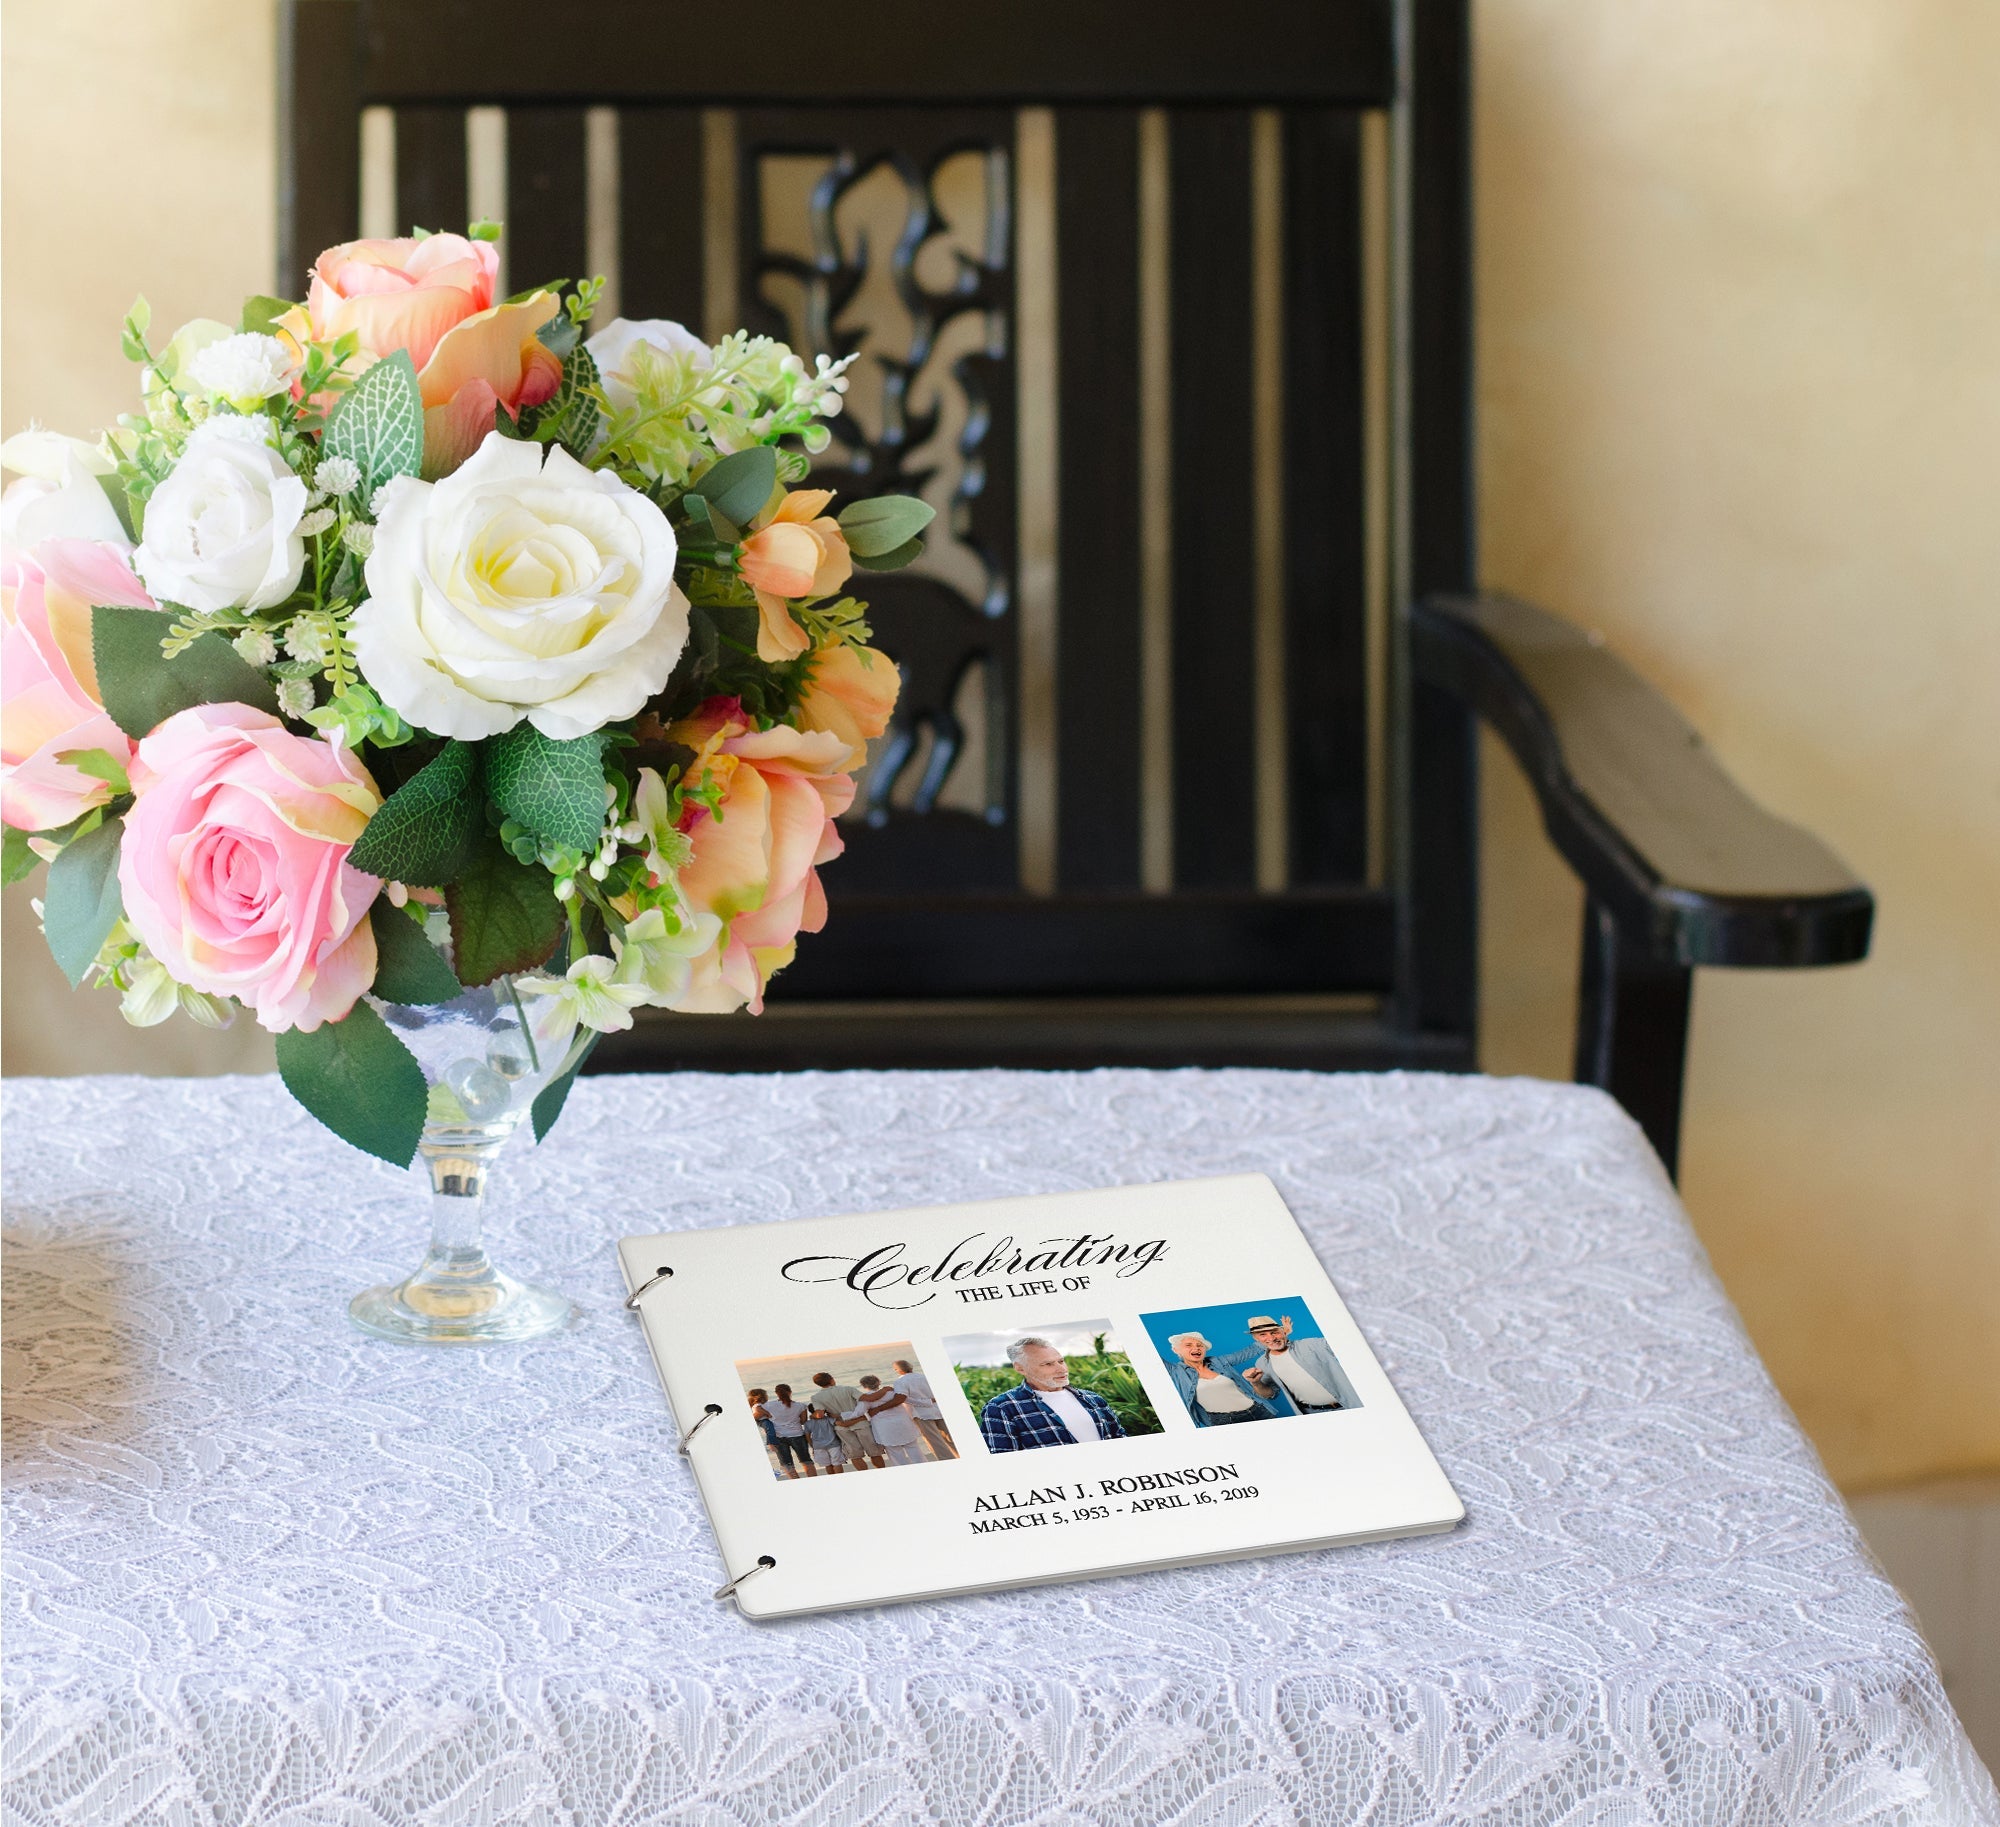 Personalized Funeral Service Guest Book 8.5x11 Celebrating The Life - LifeSong Milestones